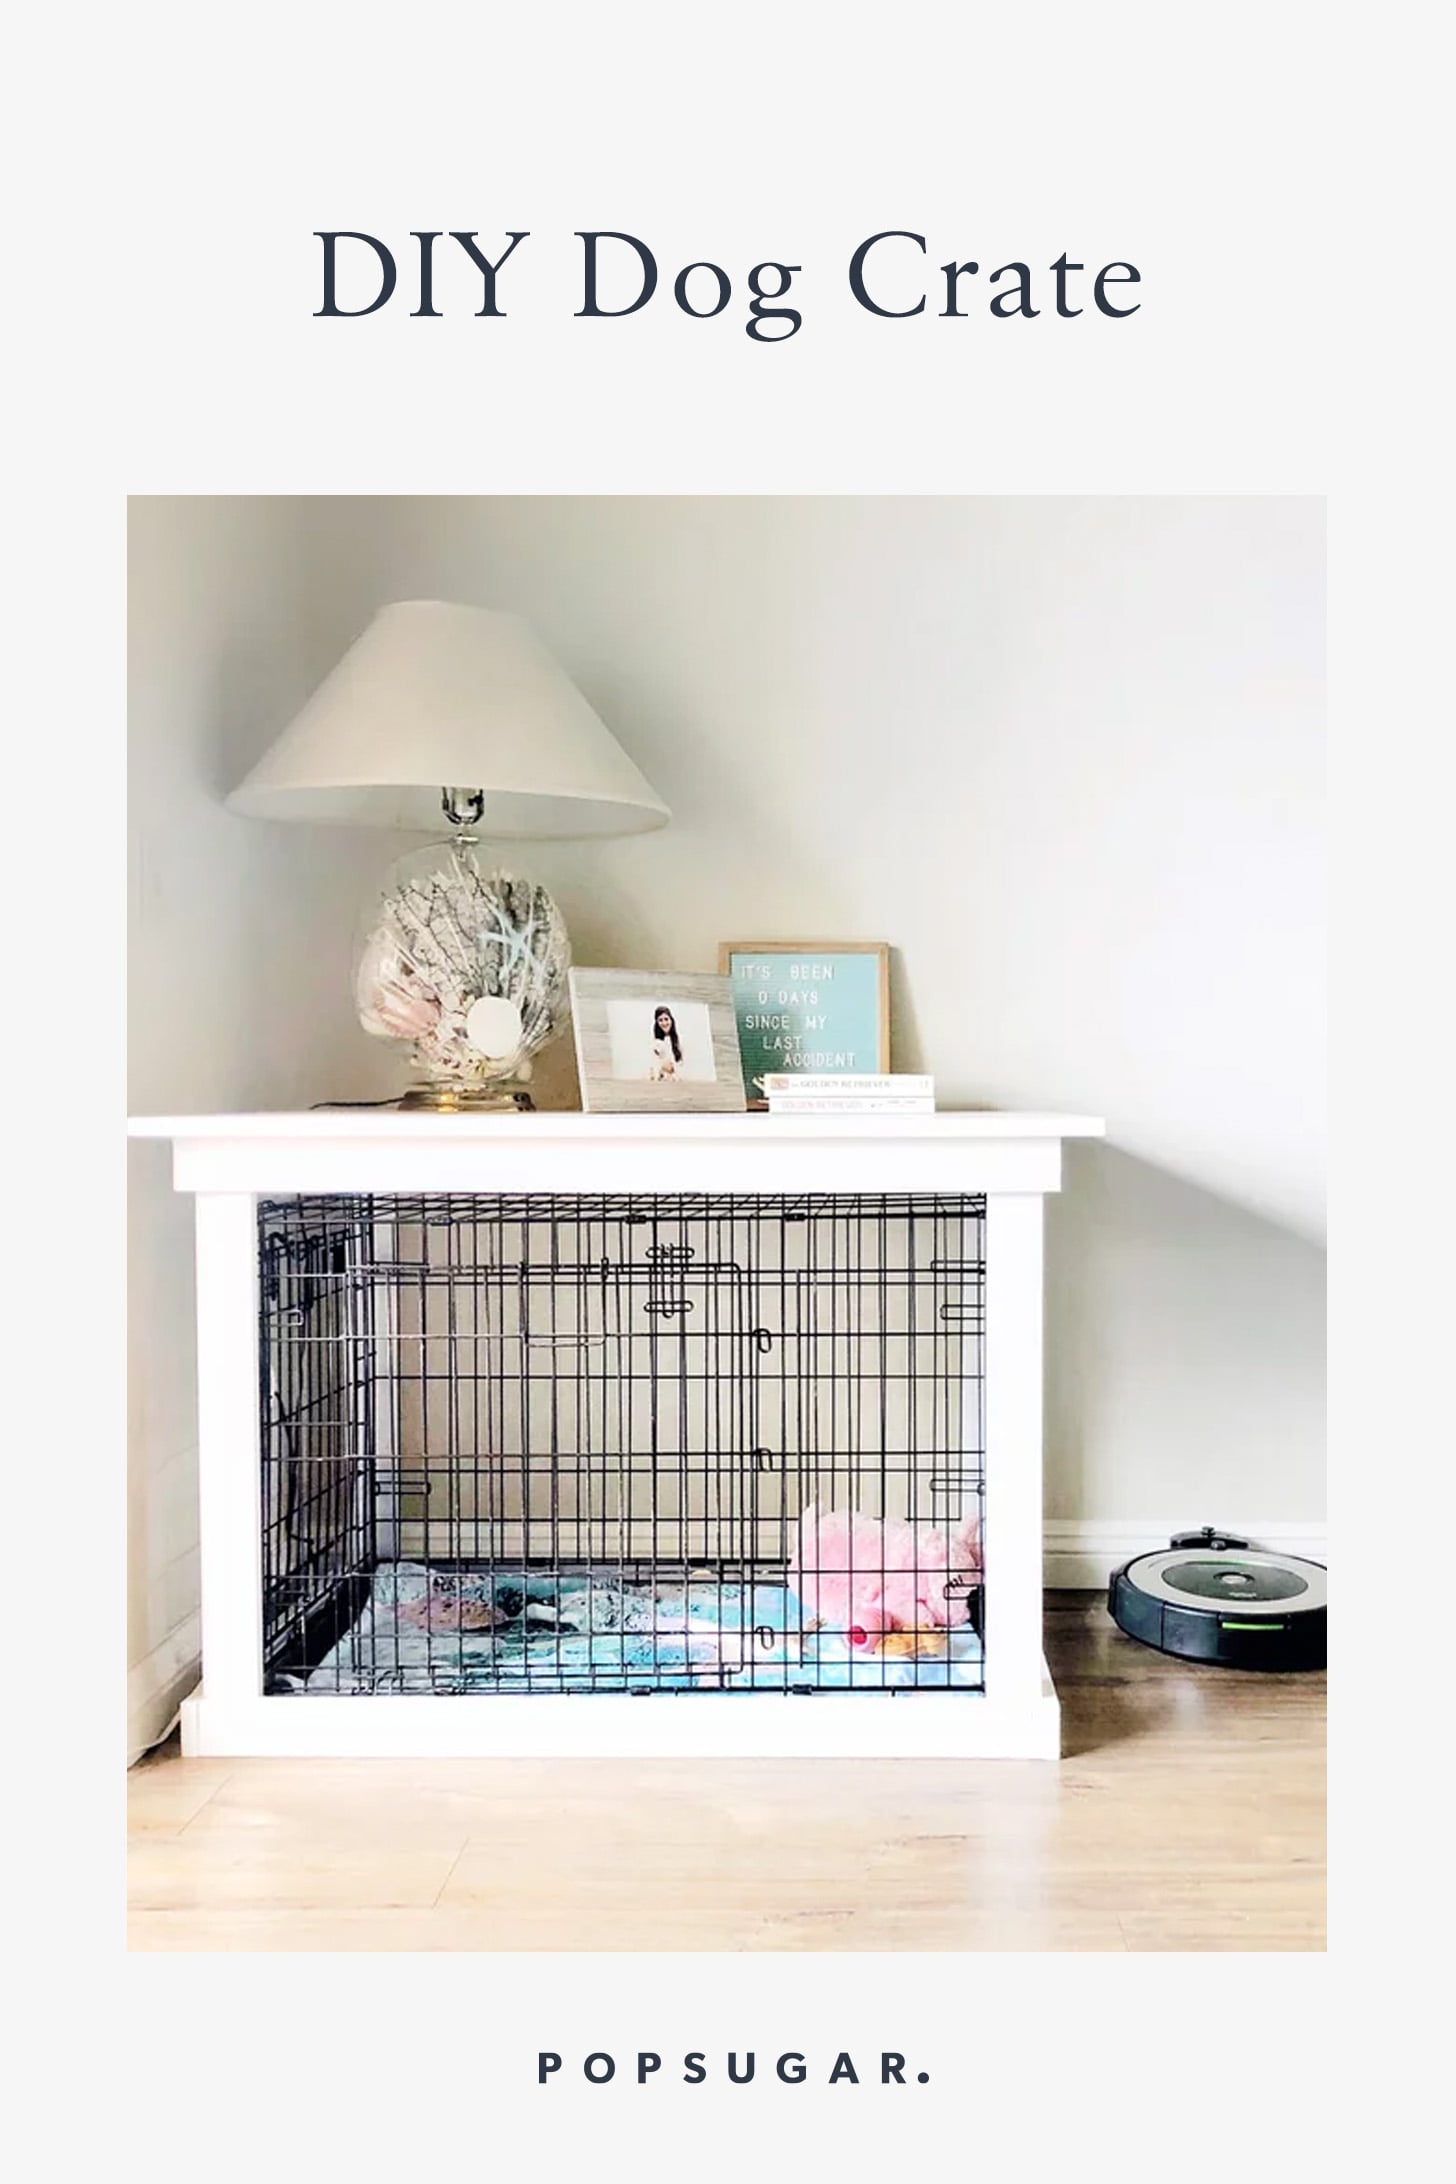 cheap dog cages